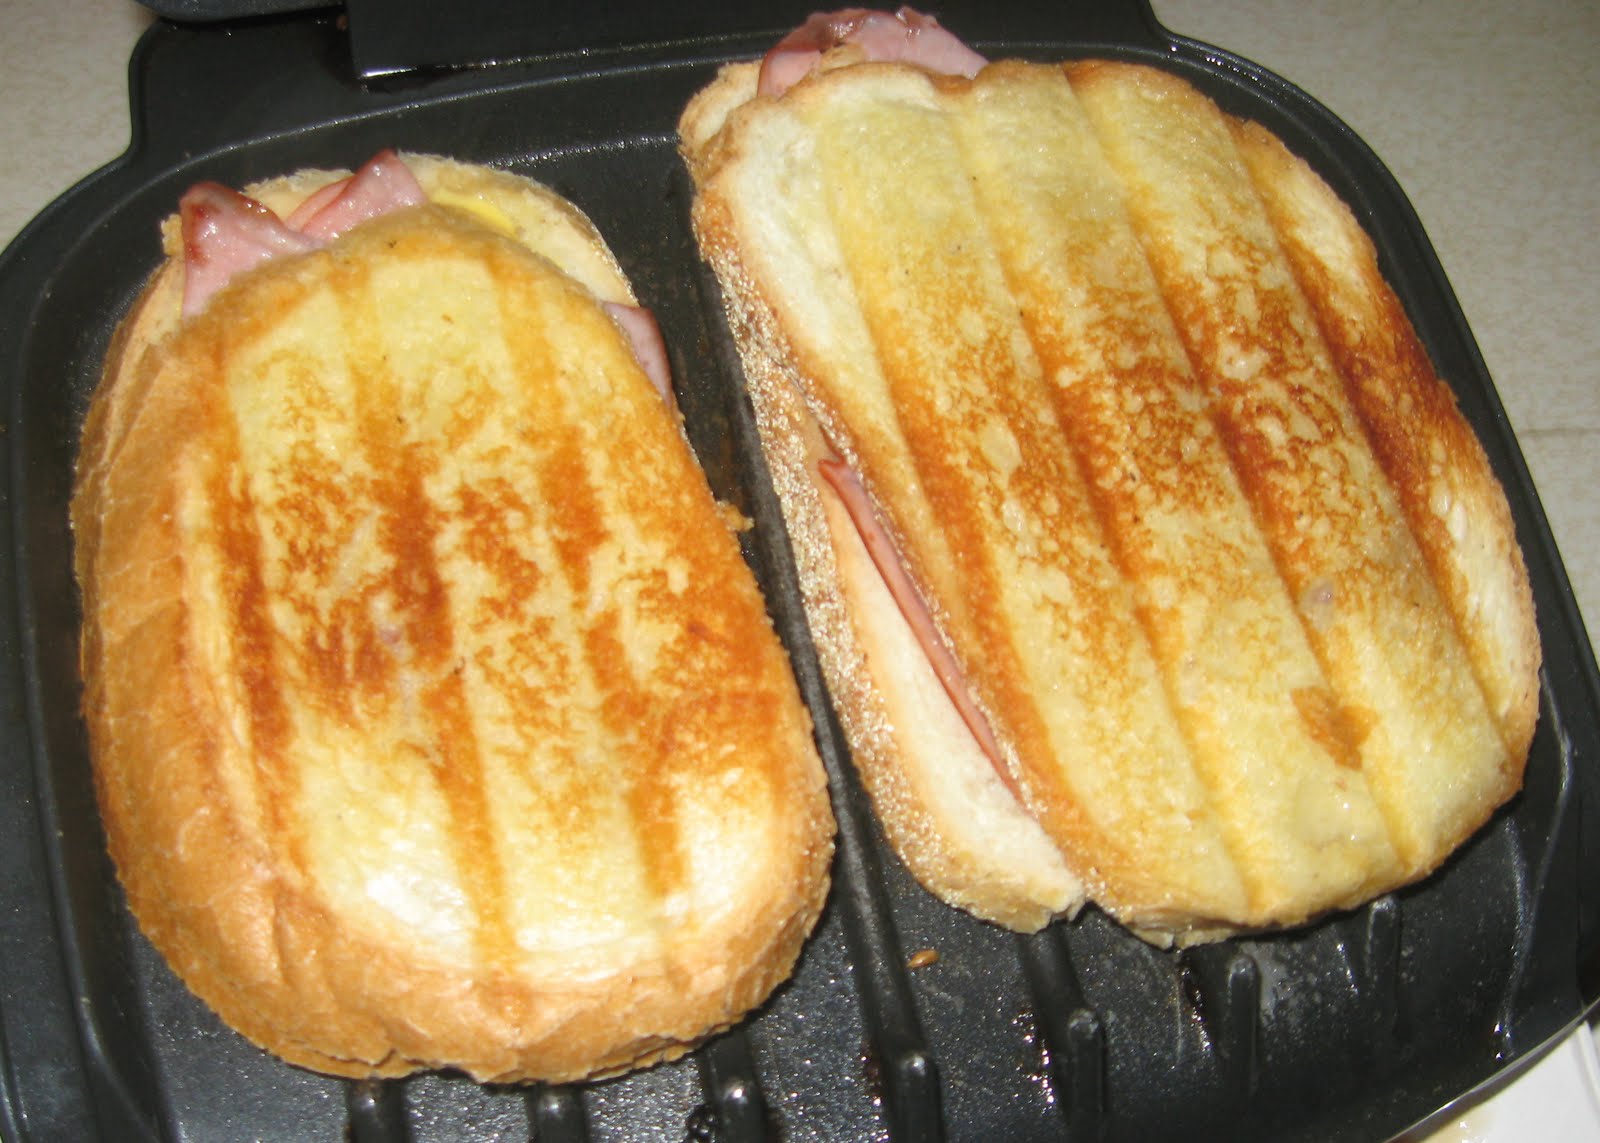 Half Fast Cook How to Make a Panini Sandwich on a Foreman Grill